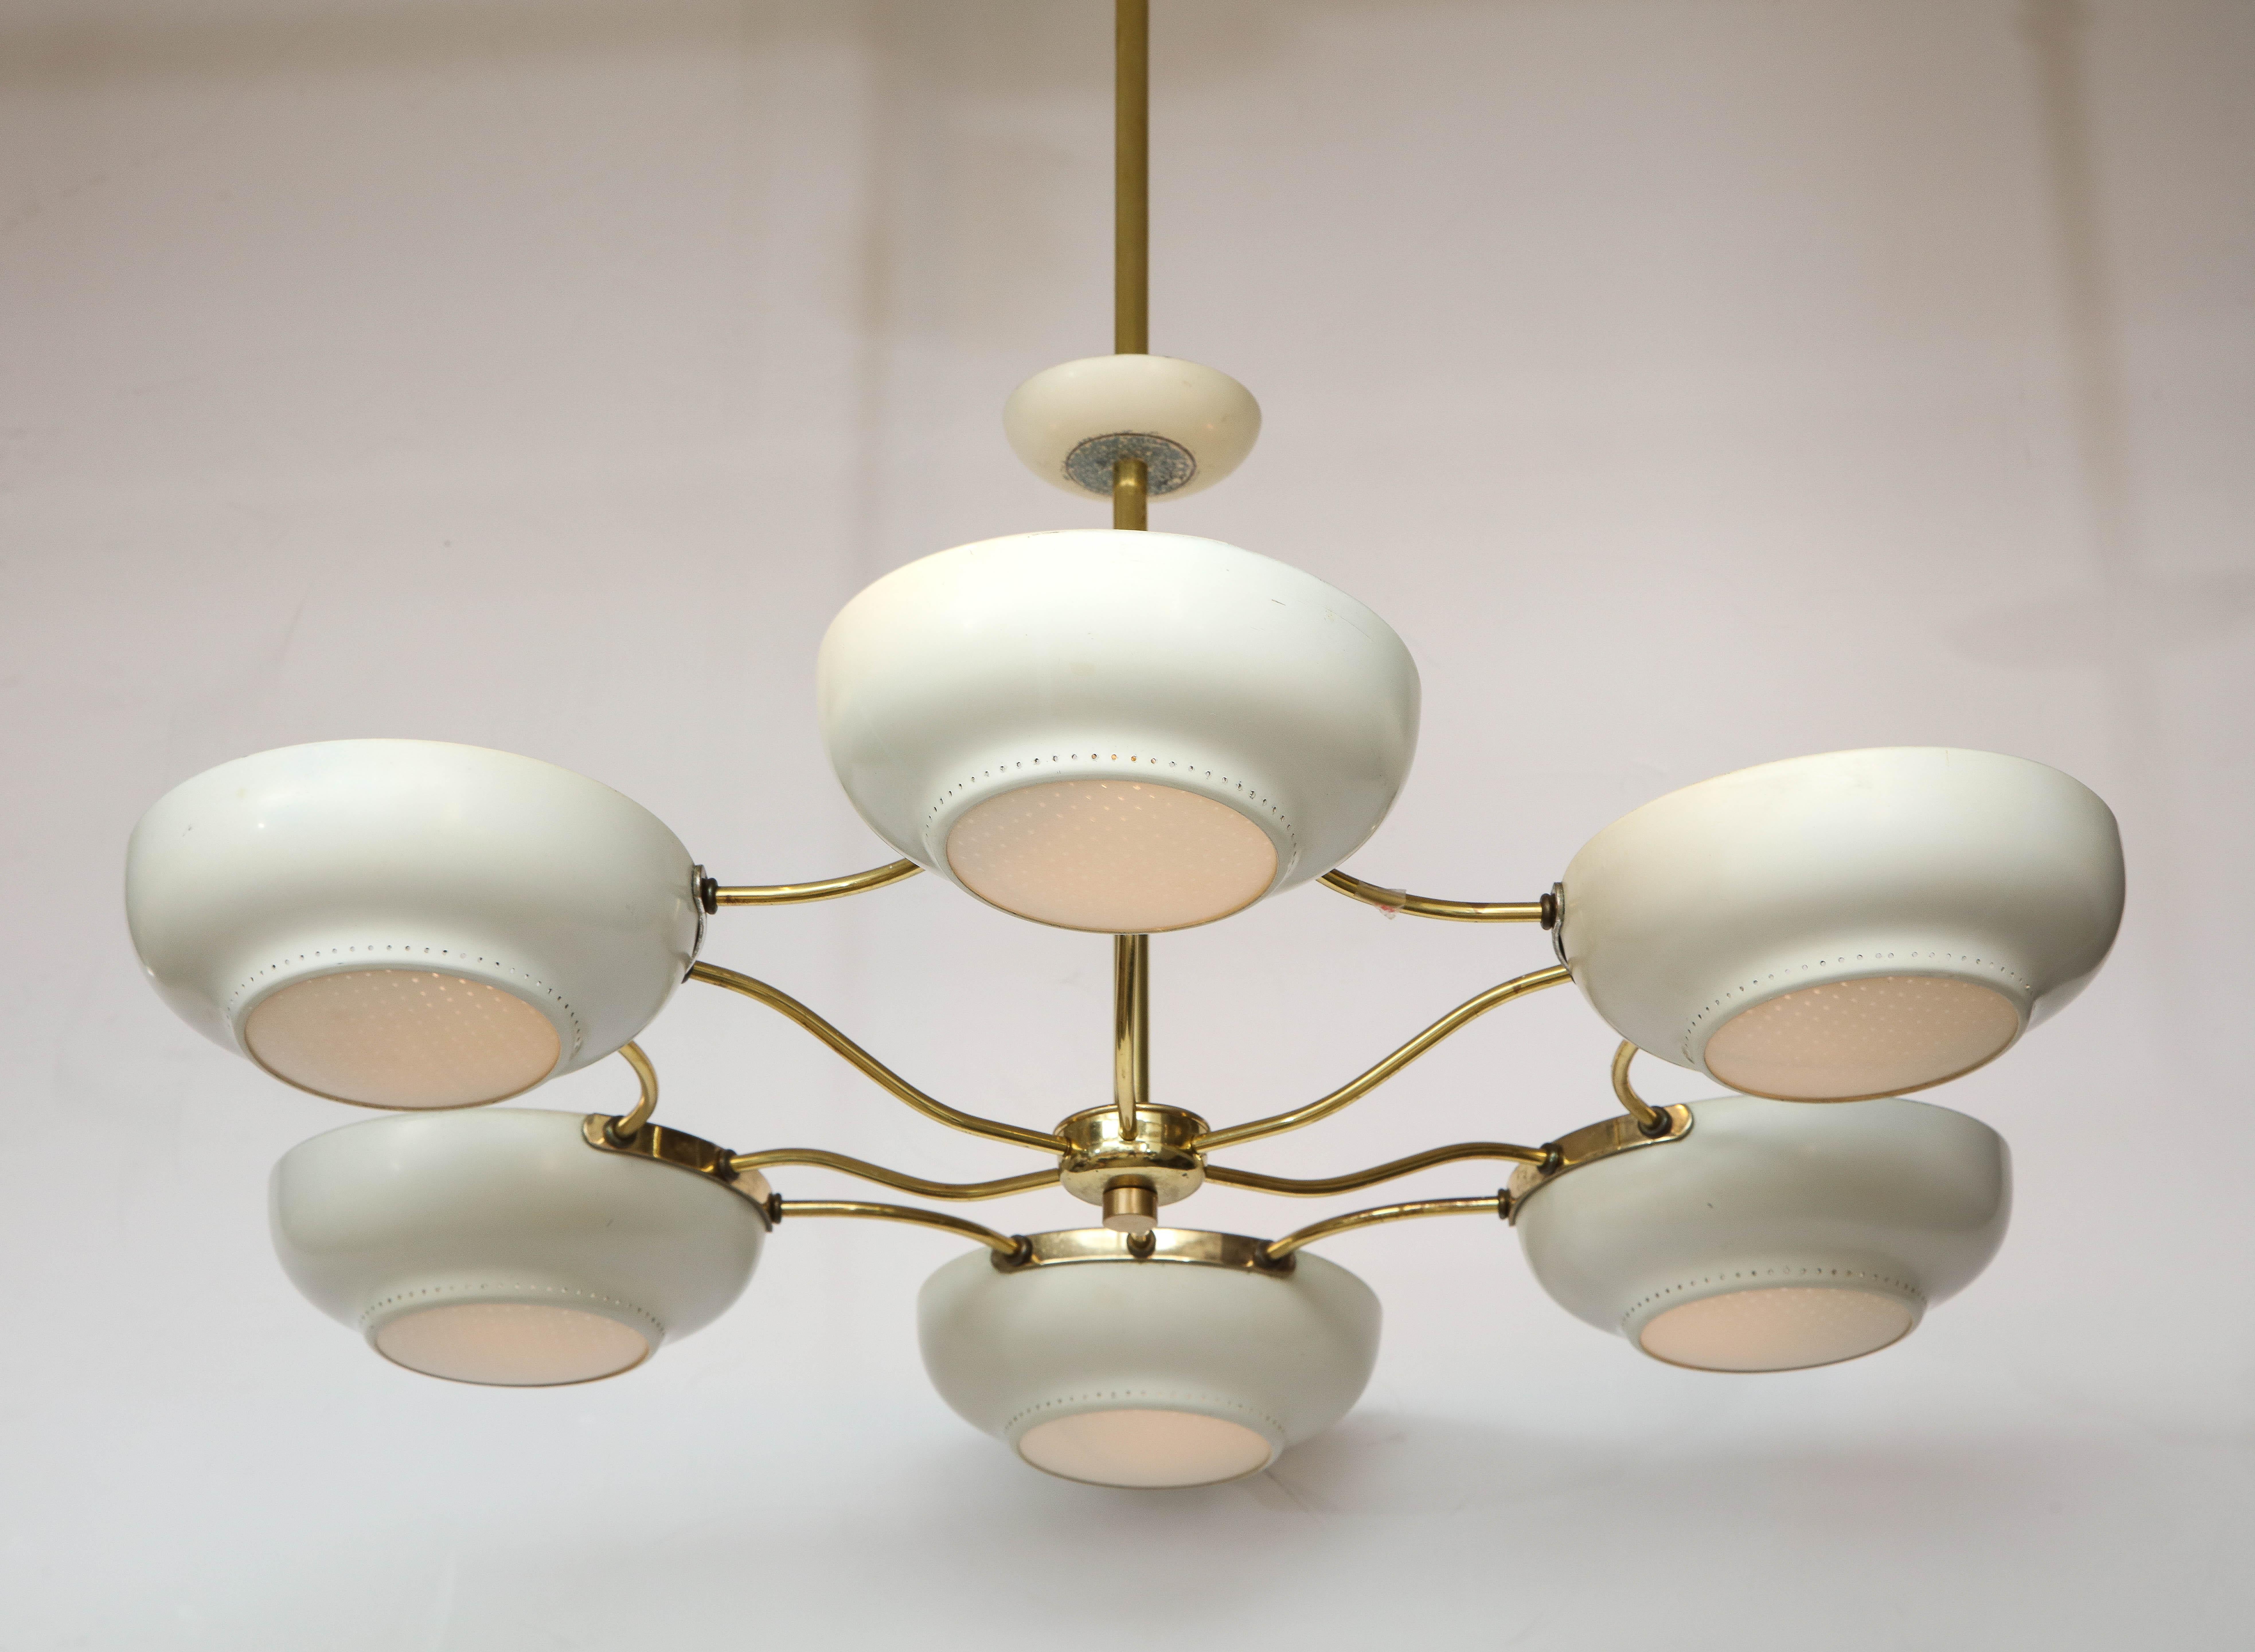 Stunning 1960's Mid-Century Modern brass and enamel chandelier attributed to Gerald Thurston for Lightolier, in vintage condition with minor wear and patina due to age and use, newly rewired and ready to use.